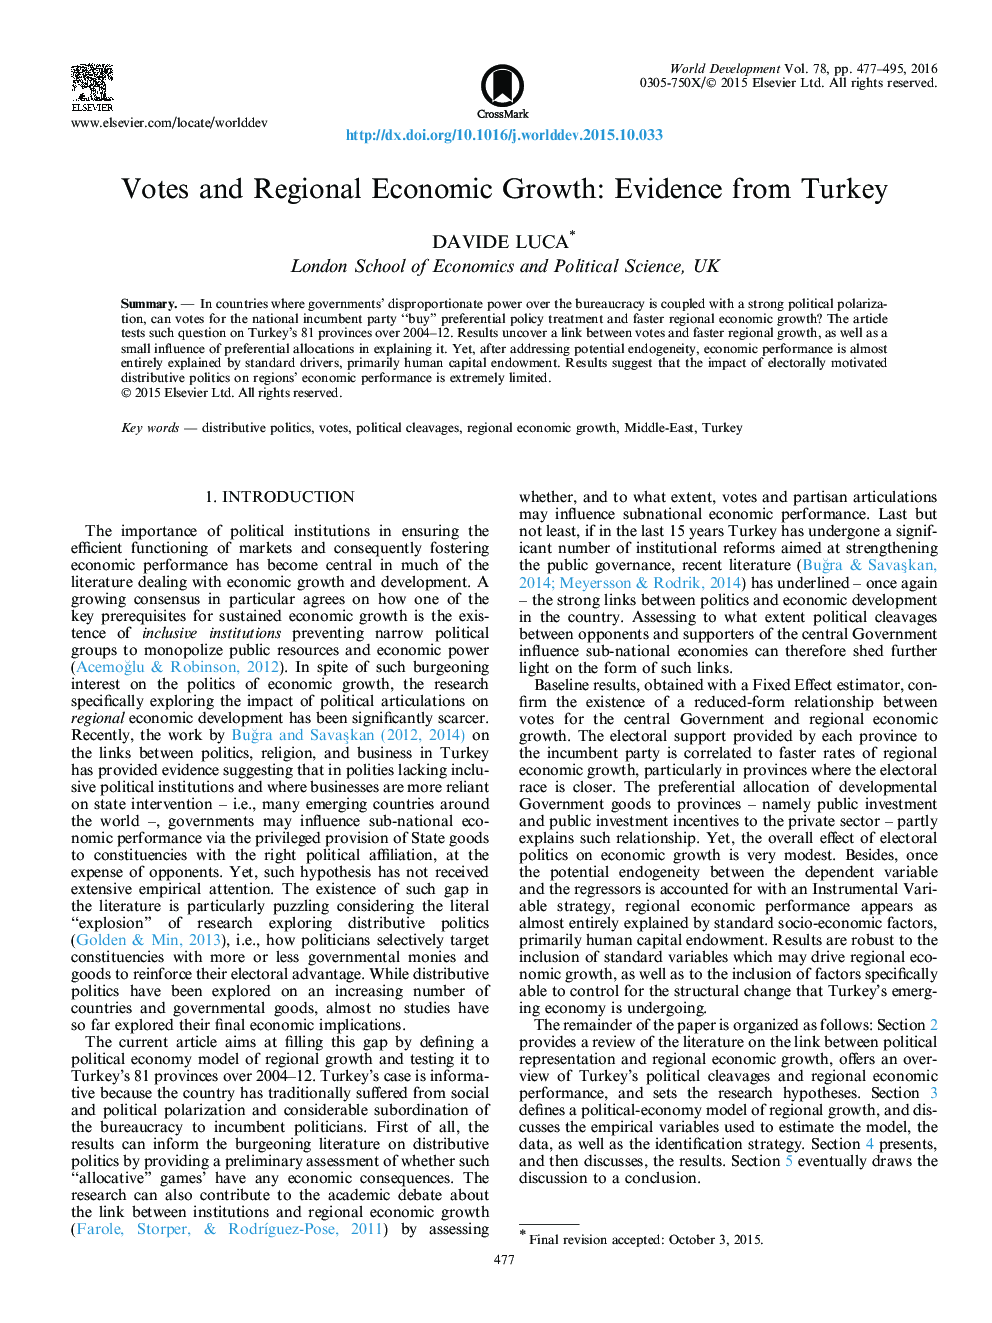 Votes and Regional Economic Growth: Evidence from Turkey